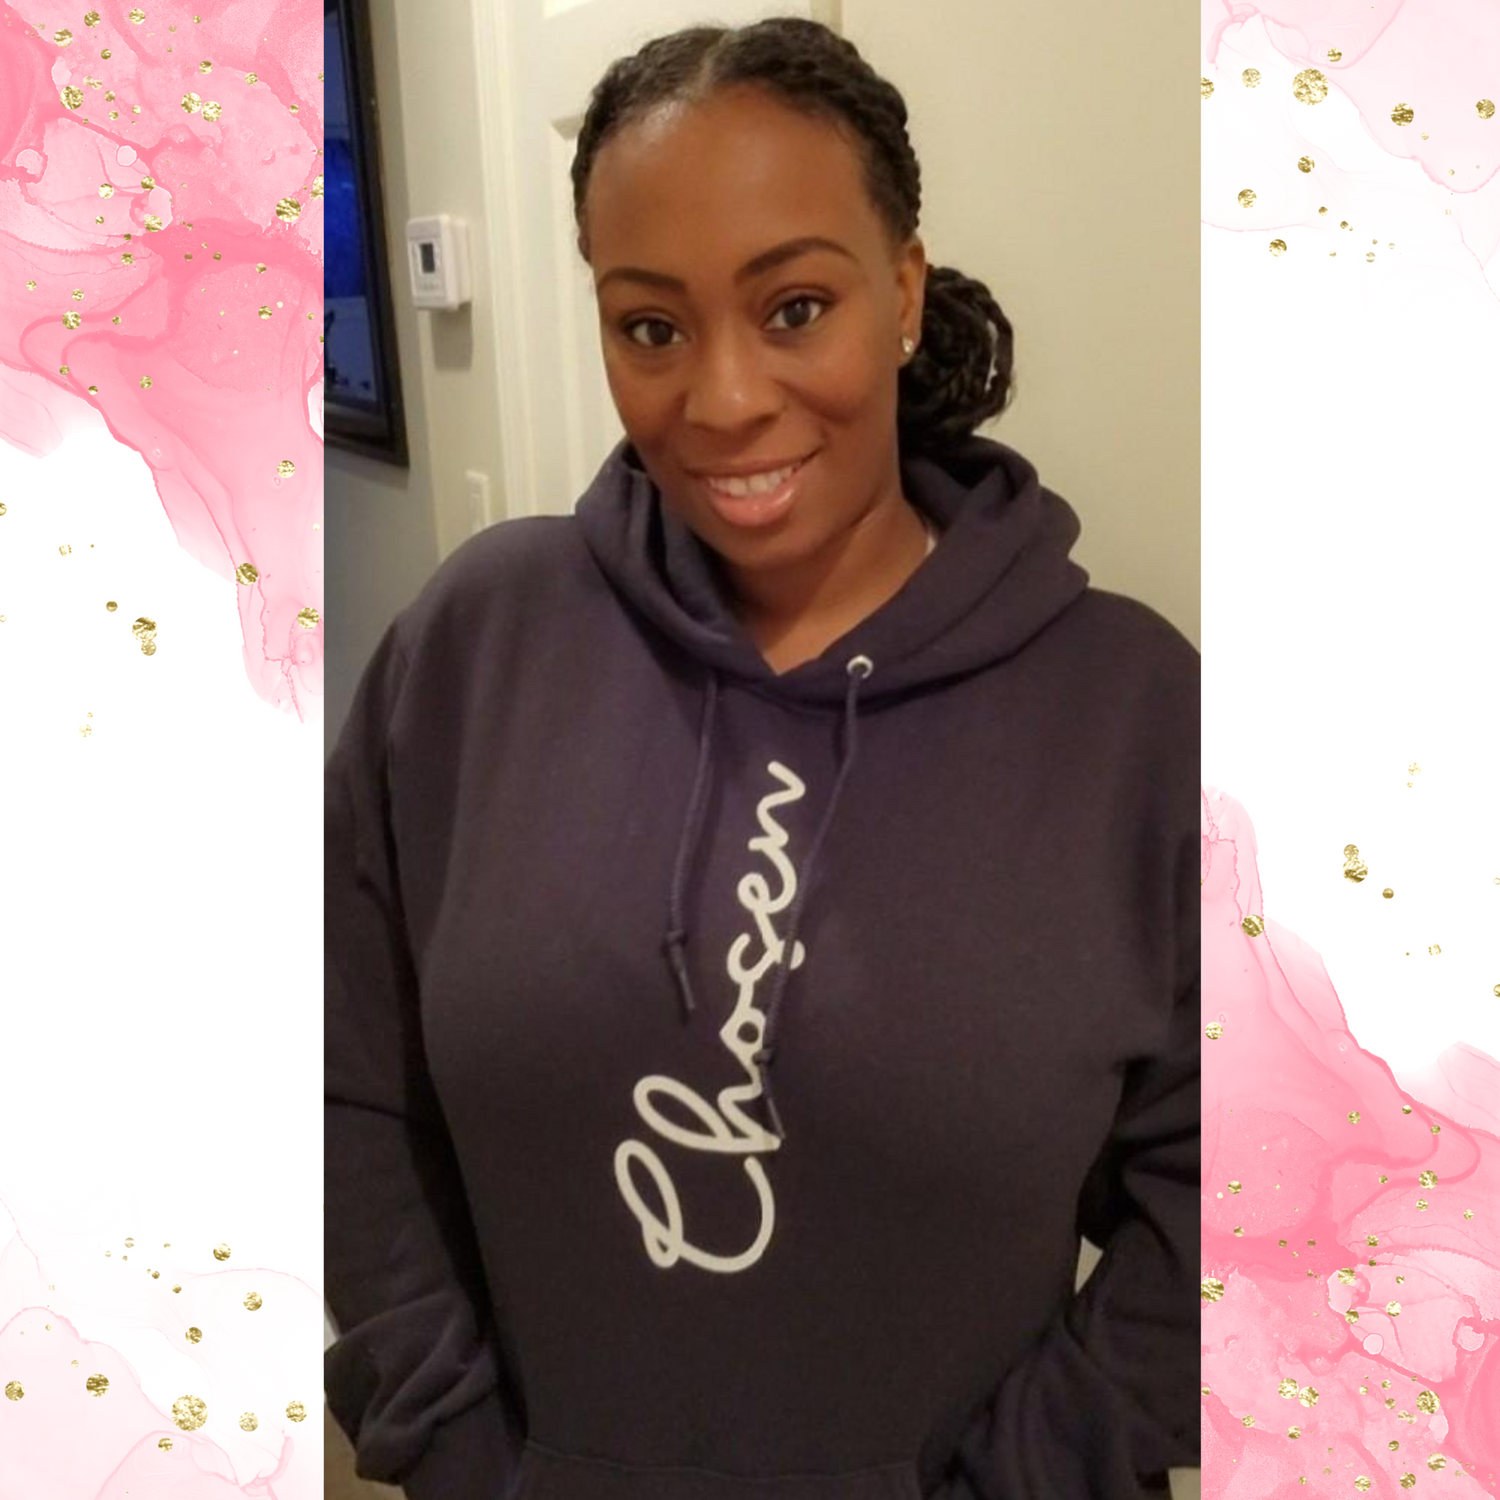 Chosen Hoodie to represent your faith and knowing you are chosen by God for His purpose and plan for your life. 